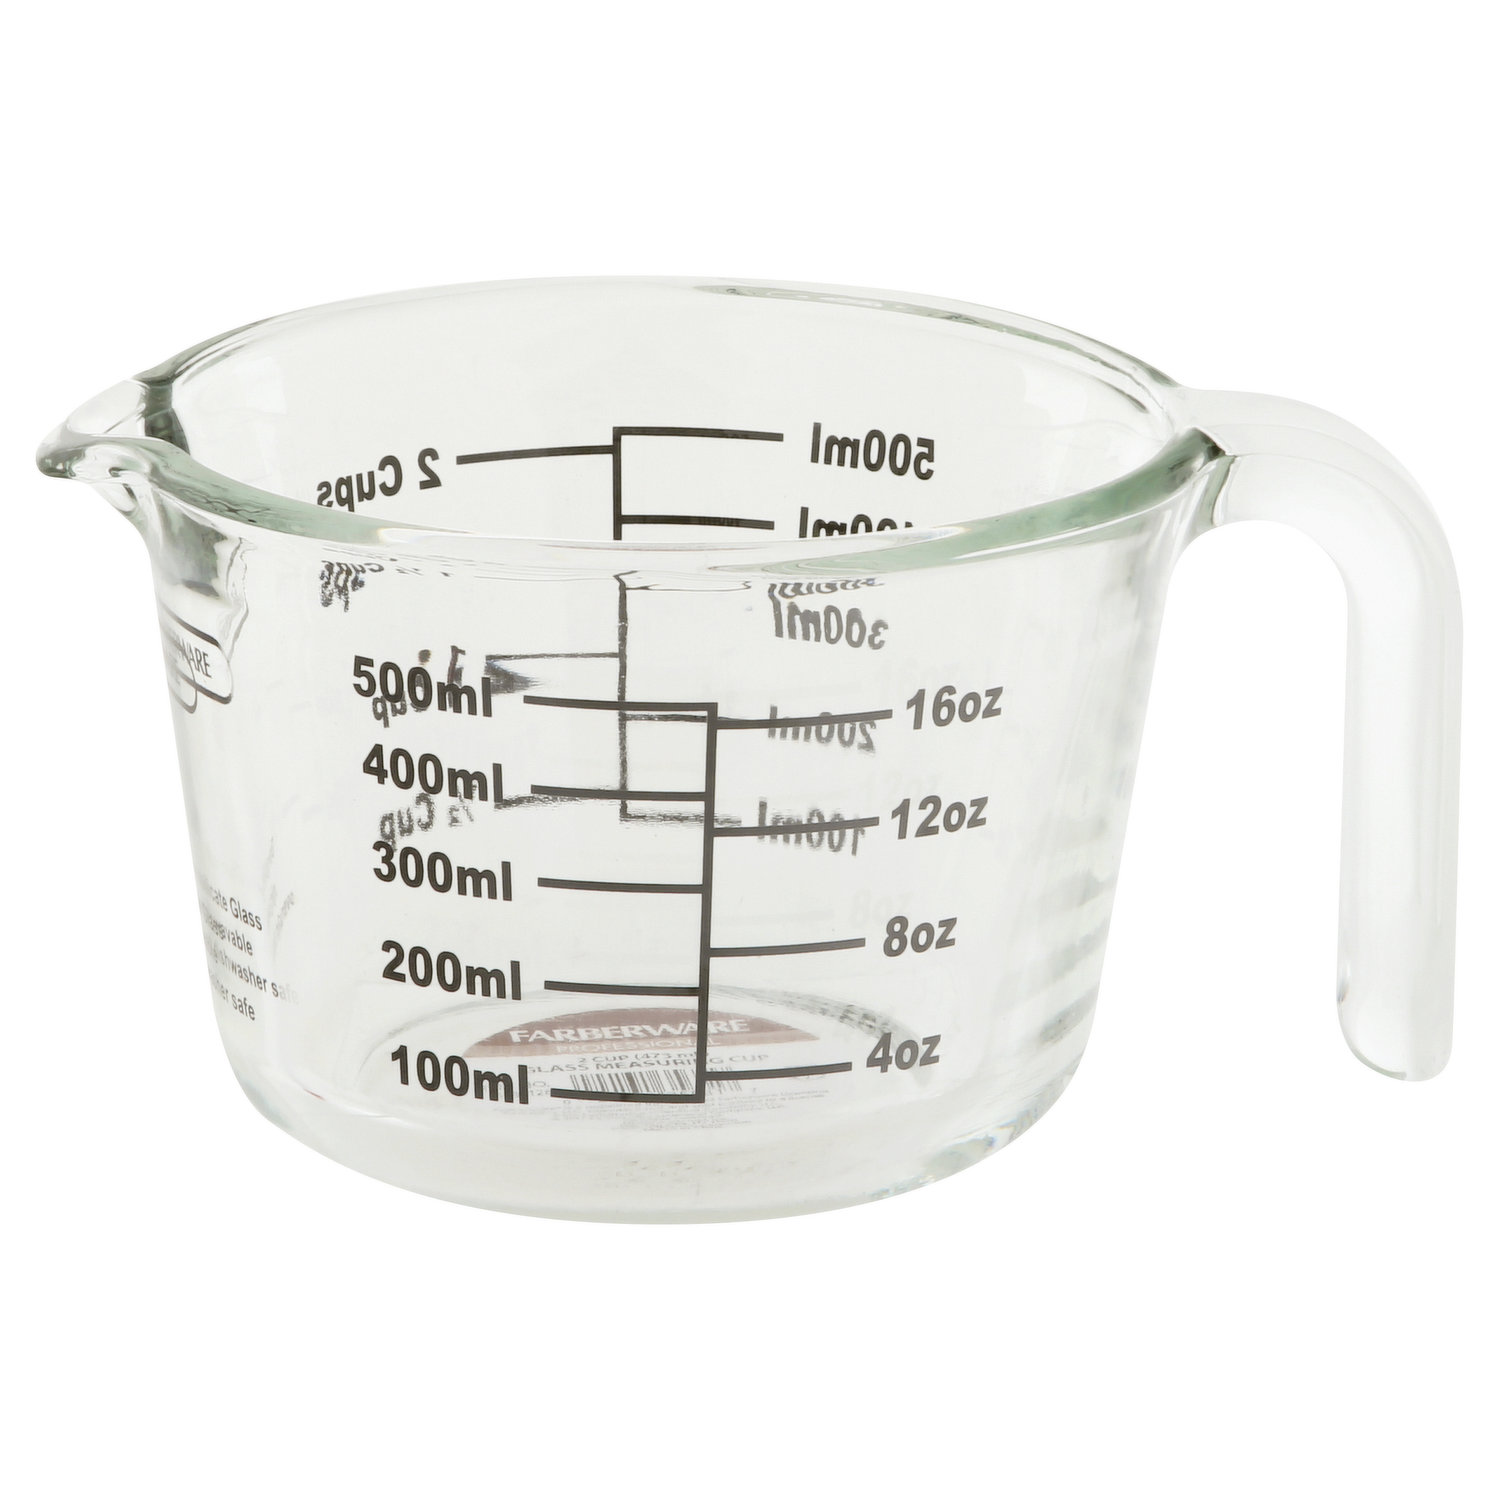 Farberware Pro Angled Measuring Cup - 2 Cups - Red